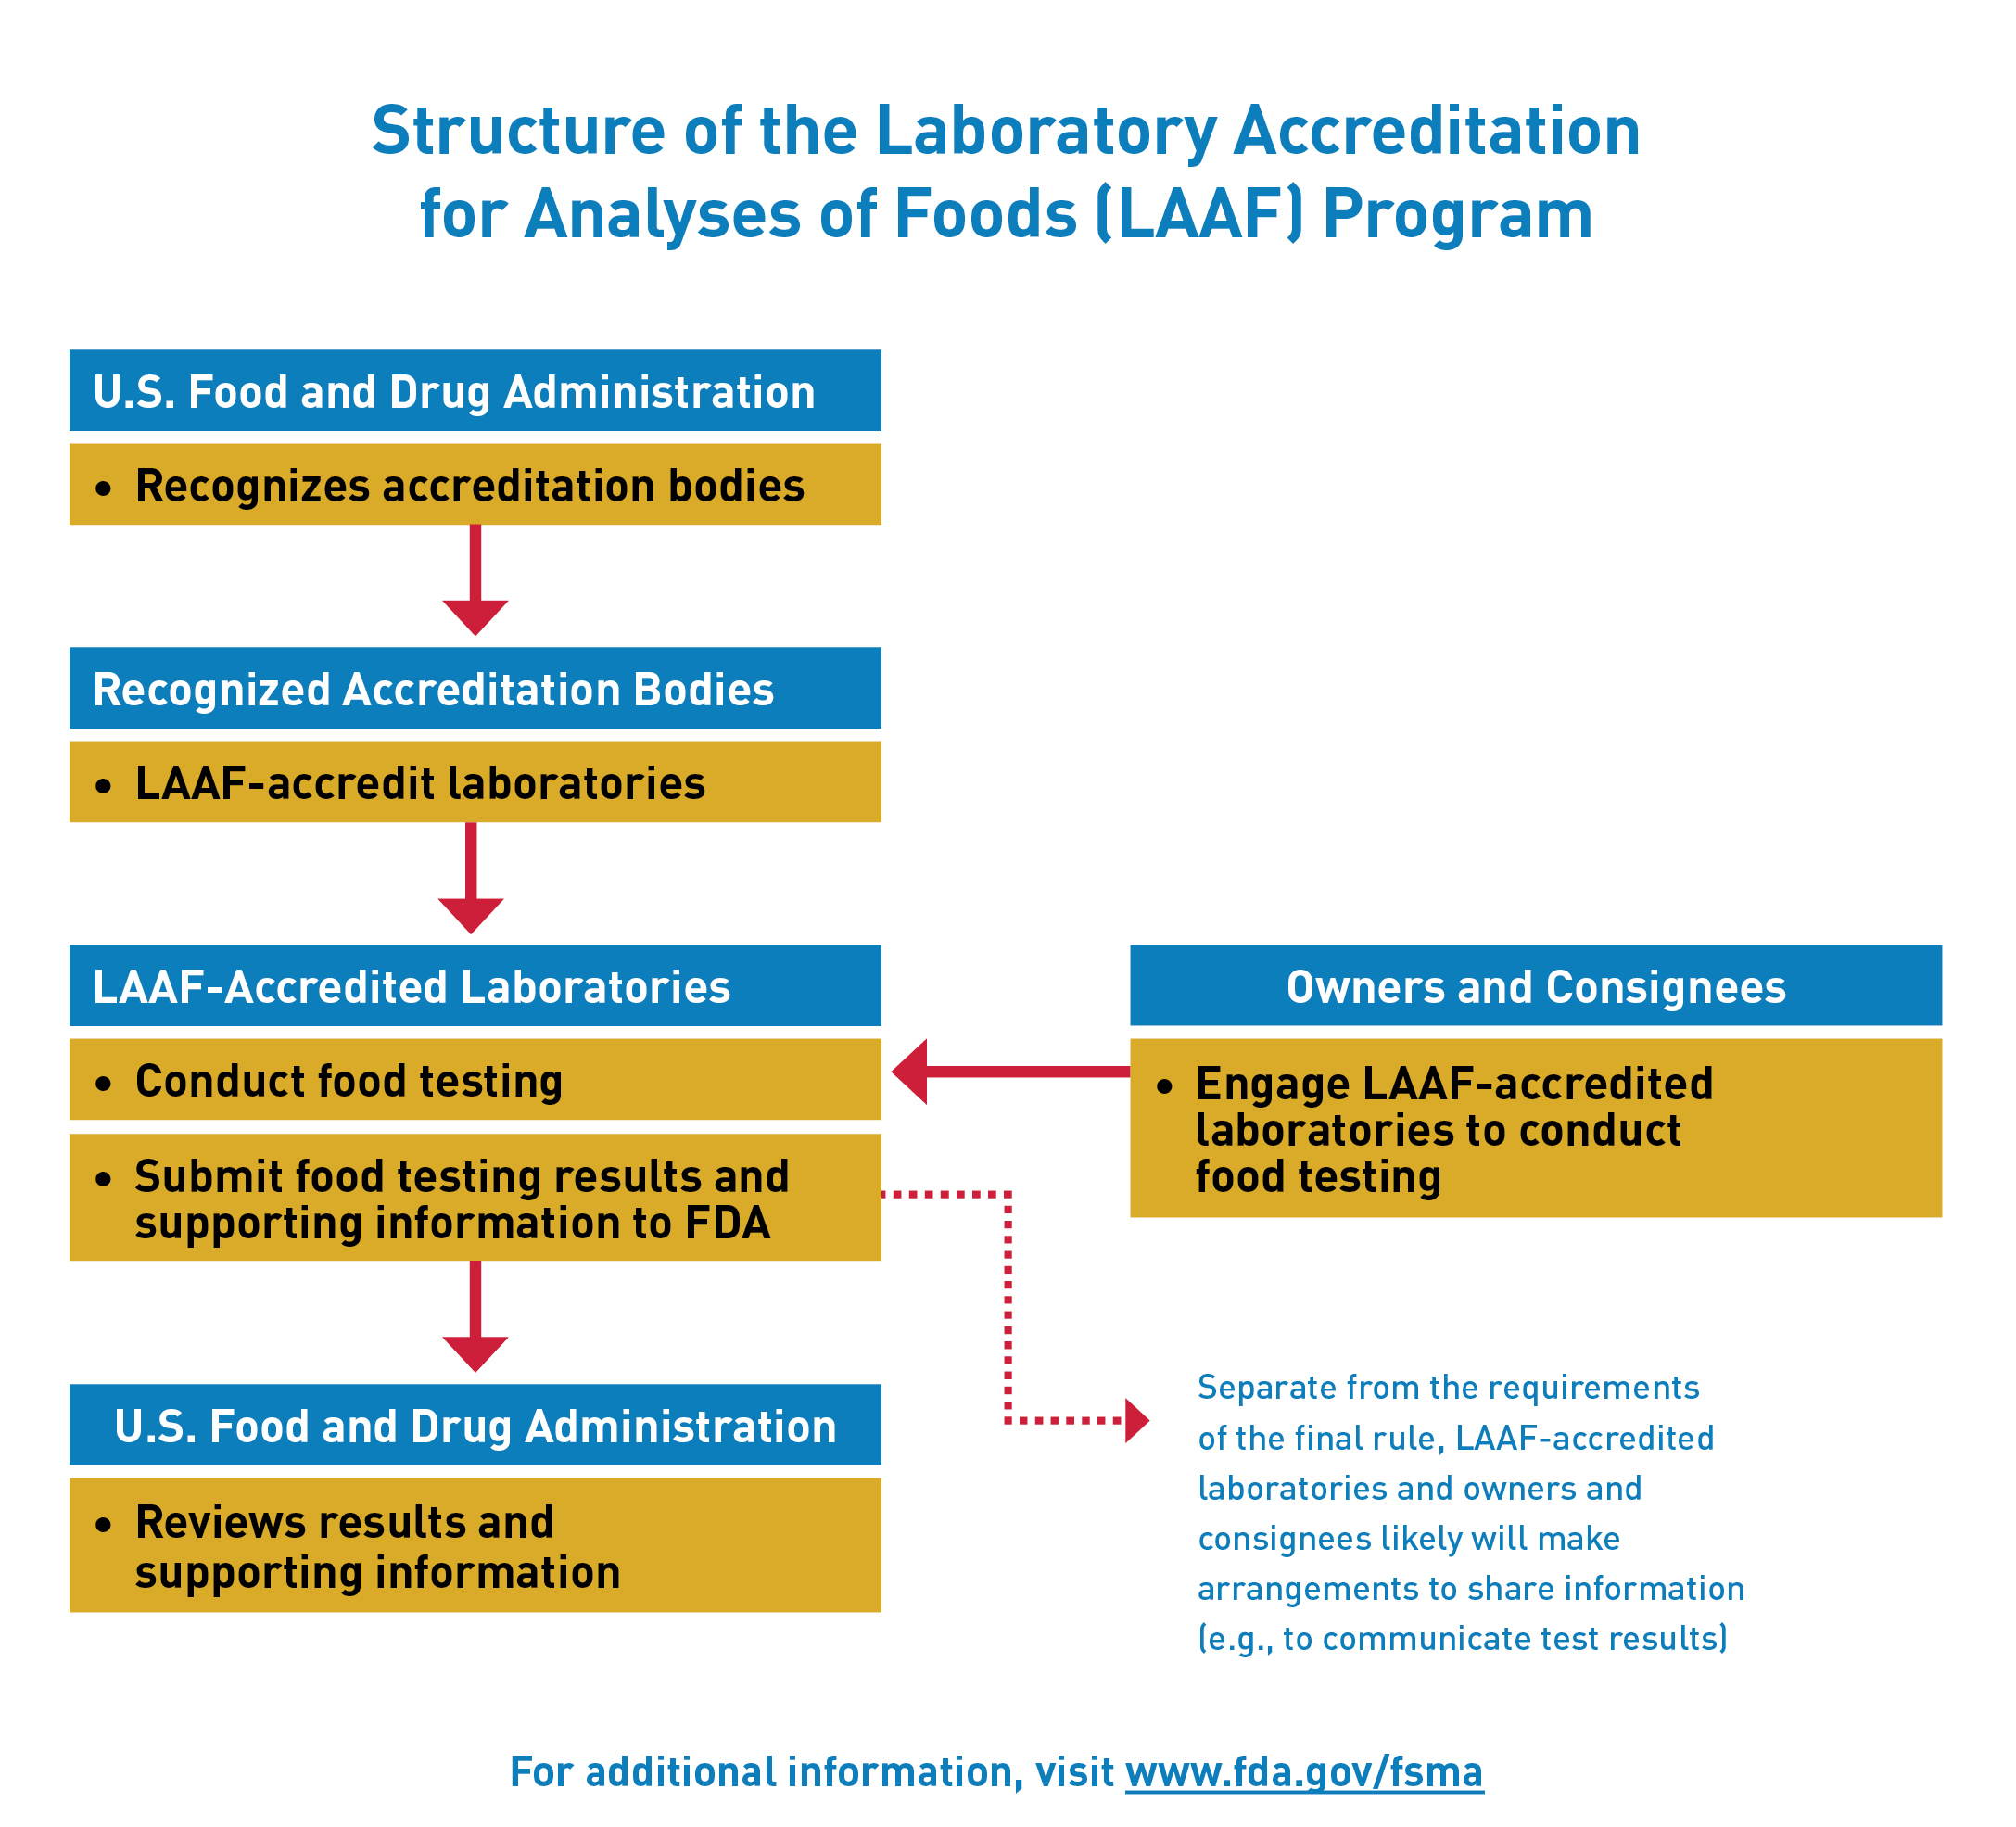 Structures of the Laboratory Accreditation for Analyses of Foods (LAAF) Program